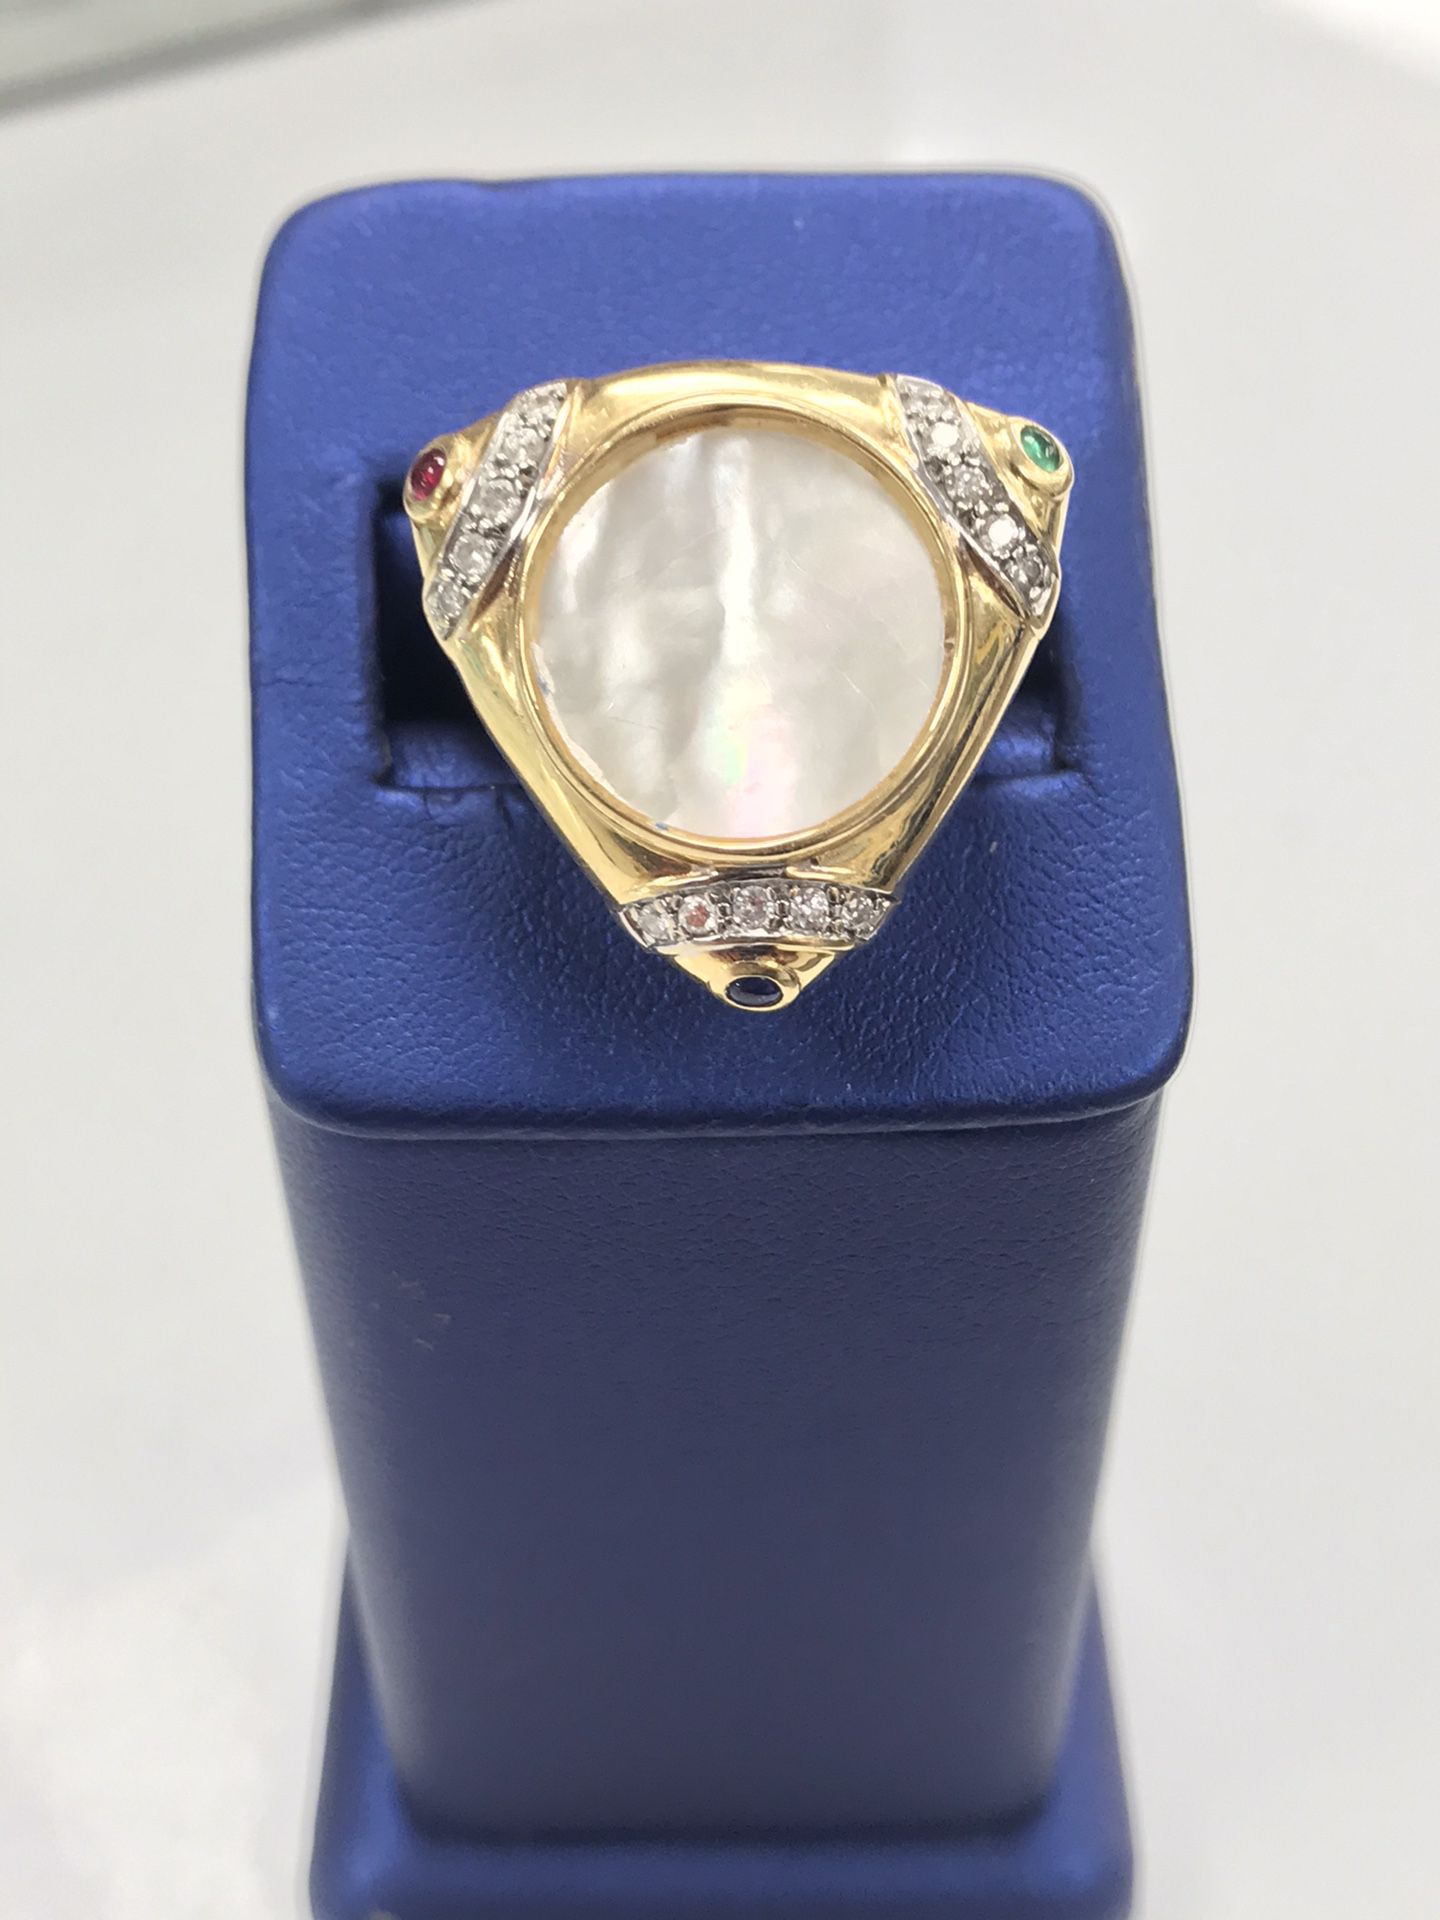 18kt gold ladies ring 9.8 grams size 7 mother of pearl stone in center .. ask for Tomas